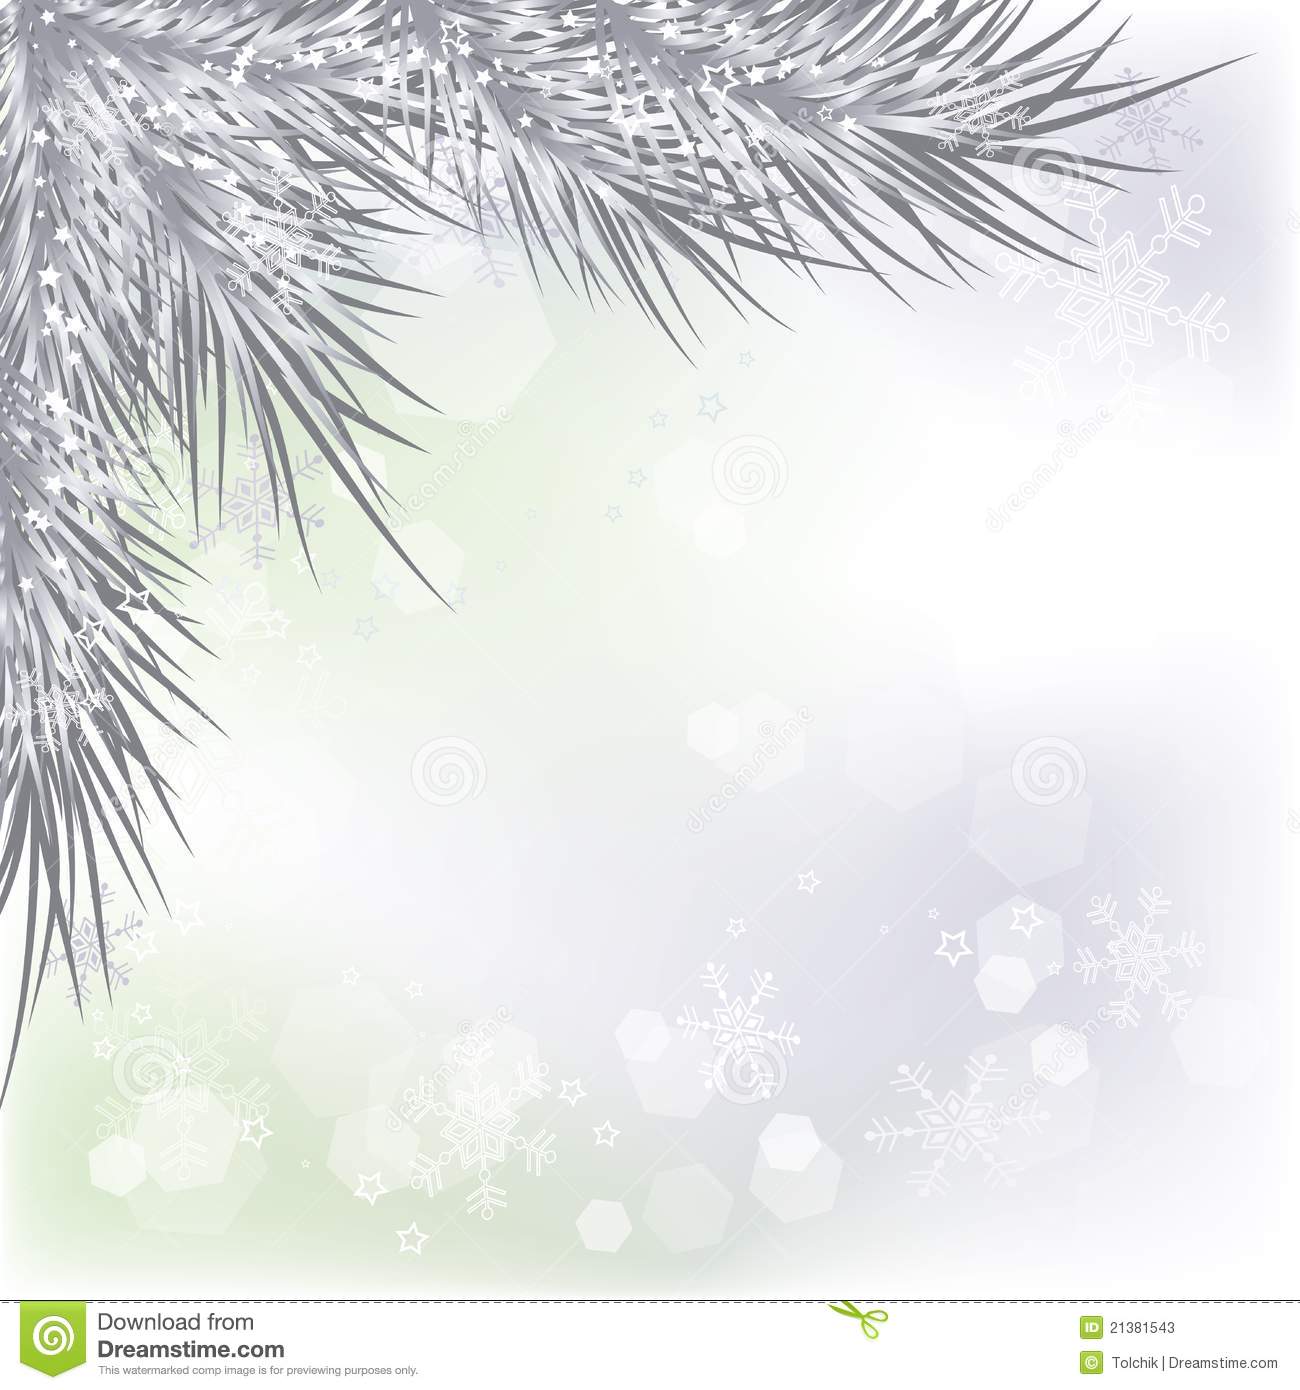 Christmas Greeting Cards Template